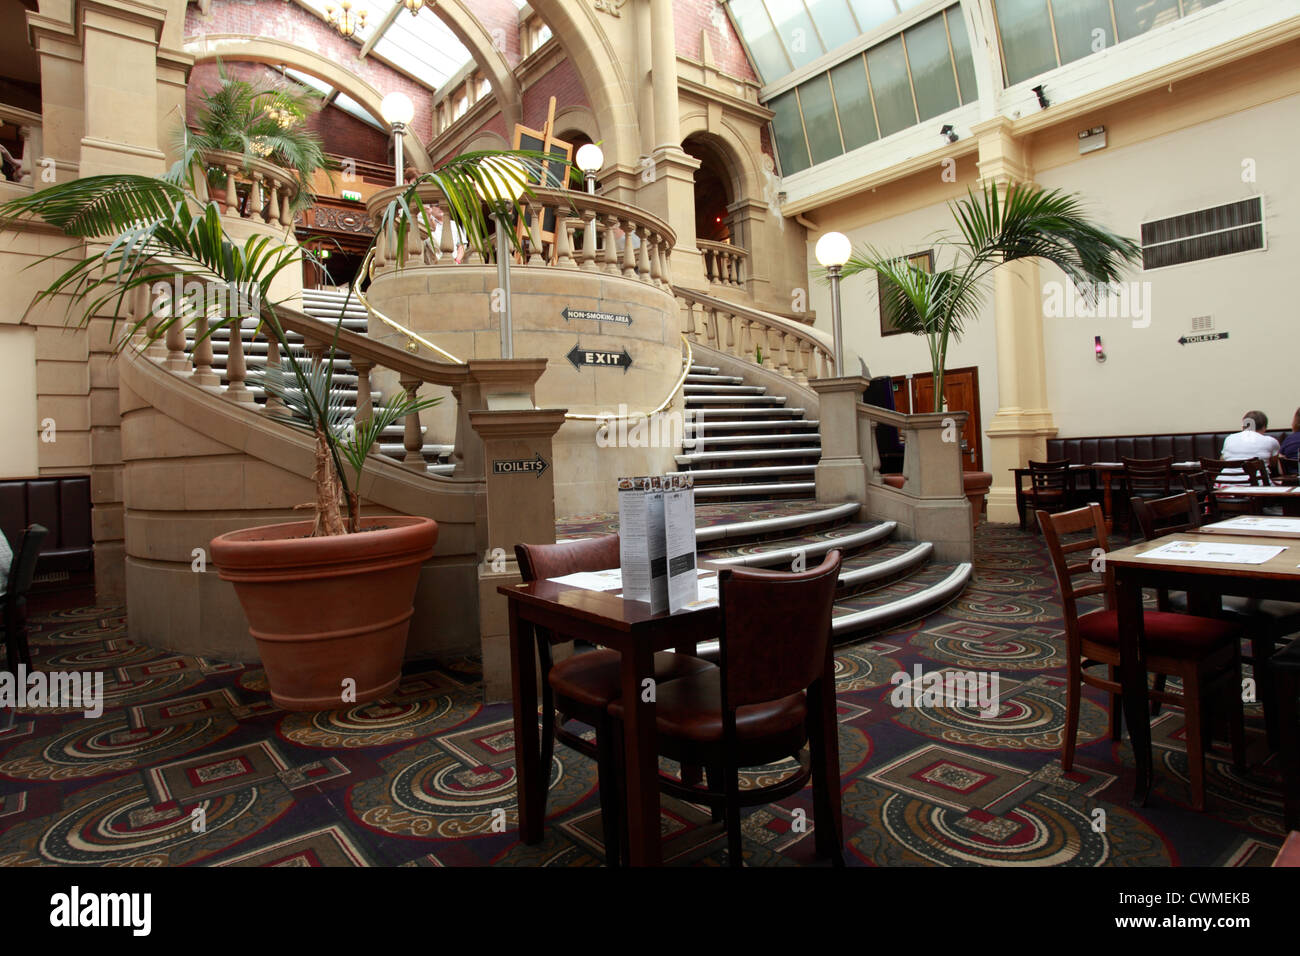 The winter gardens pub, owned by JD Wetherspoons, Harrogate, Yorkshire UK Stock Photo